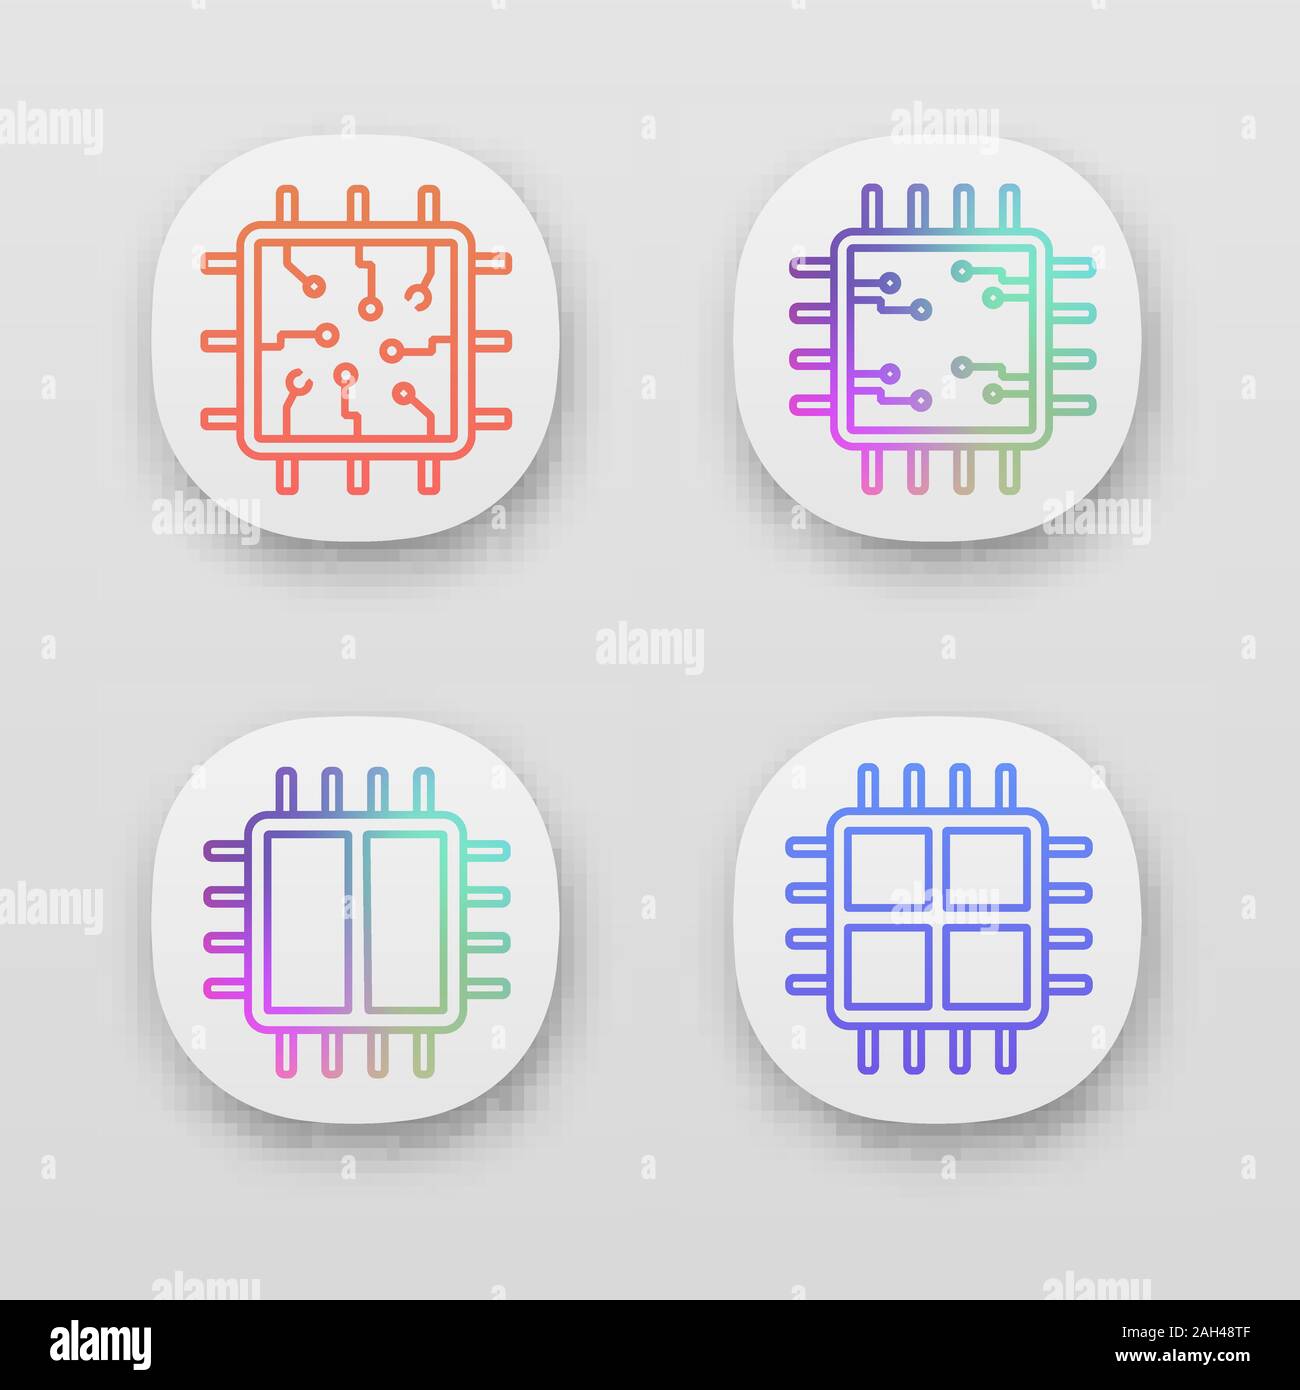 Processors app icons set. Chip, microprocessor, integrated unit, dual and quad core processors. UI/UX user interface. Web or mobile applications. Vect Stock Vector